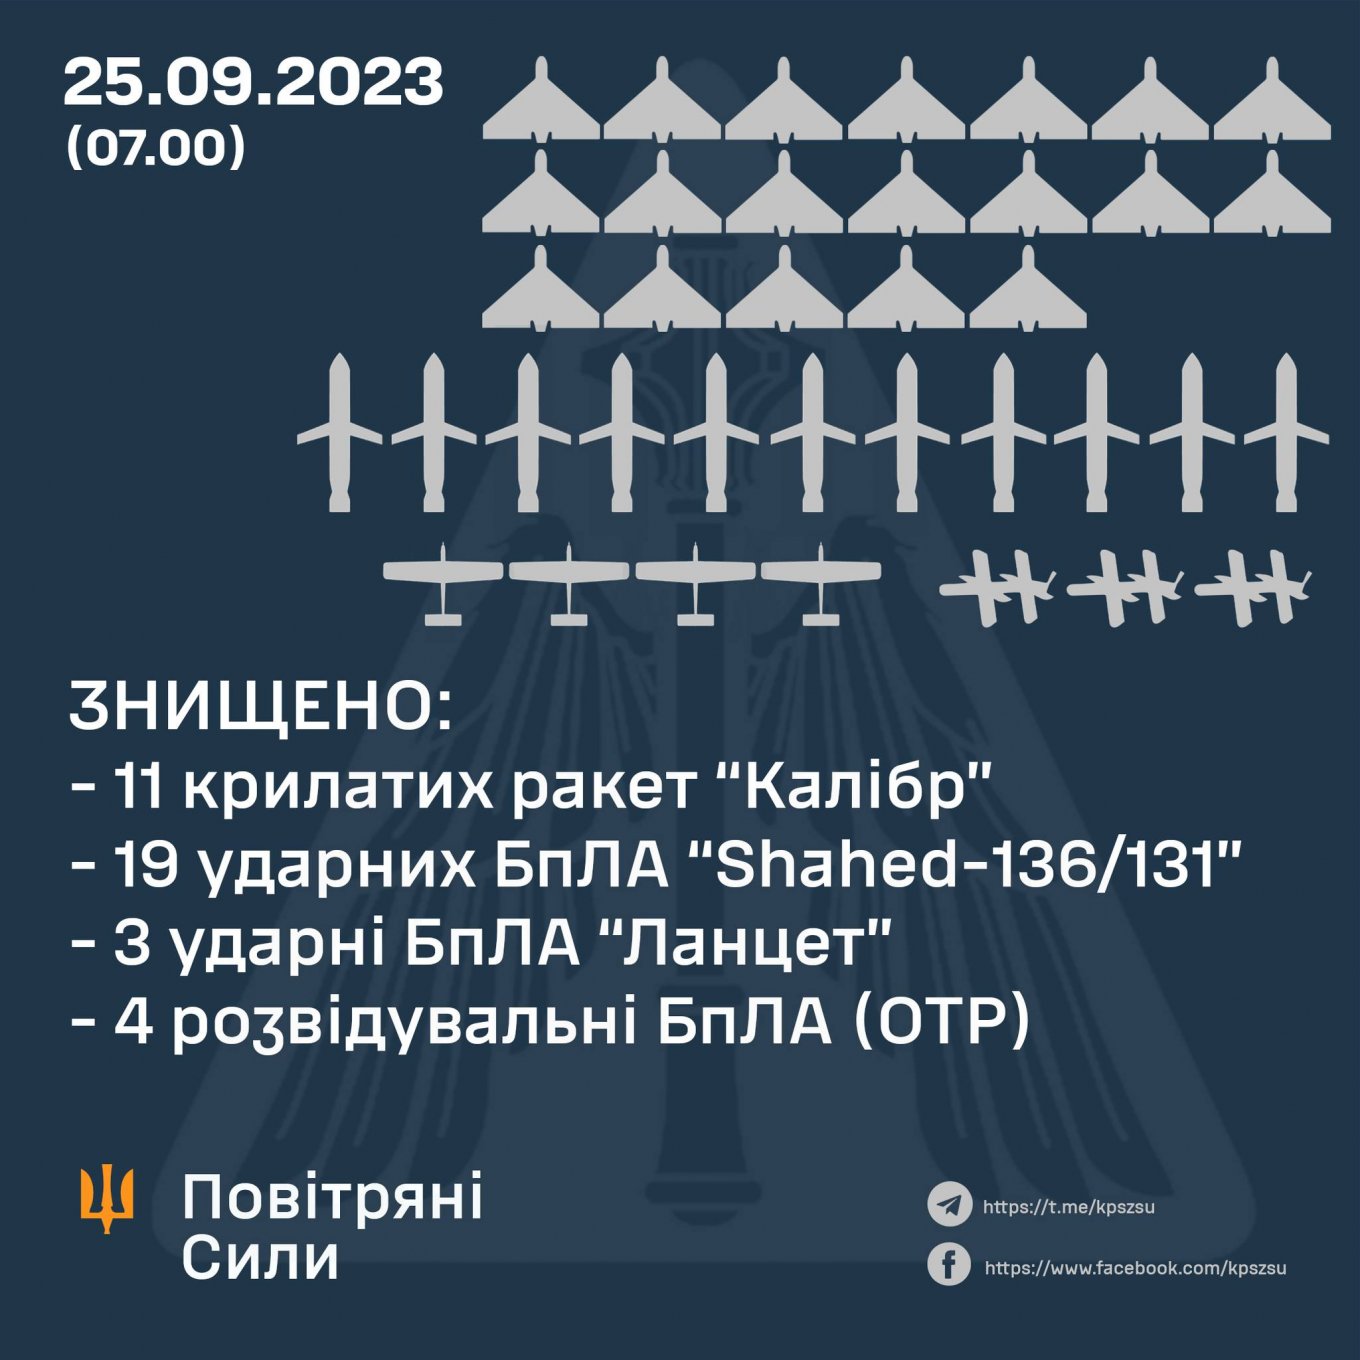 Defense Express Ukraine Shot Down 91% of the Kalibr Missiles and All the Shahed Drones, But the Issue with Oniks Missiles Remains